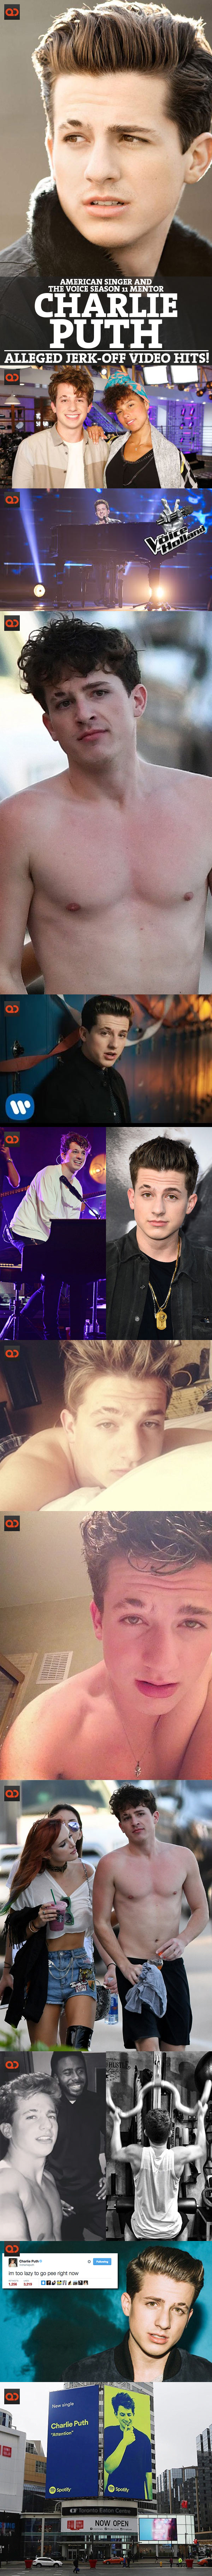 Charlie Puth, American Singer And The Voice Season 11 Mentor, Alleged Jerk-Off Video Hits!